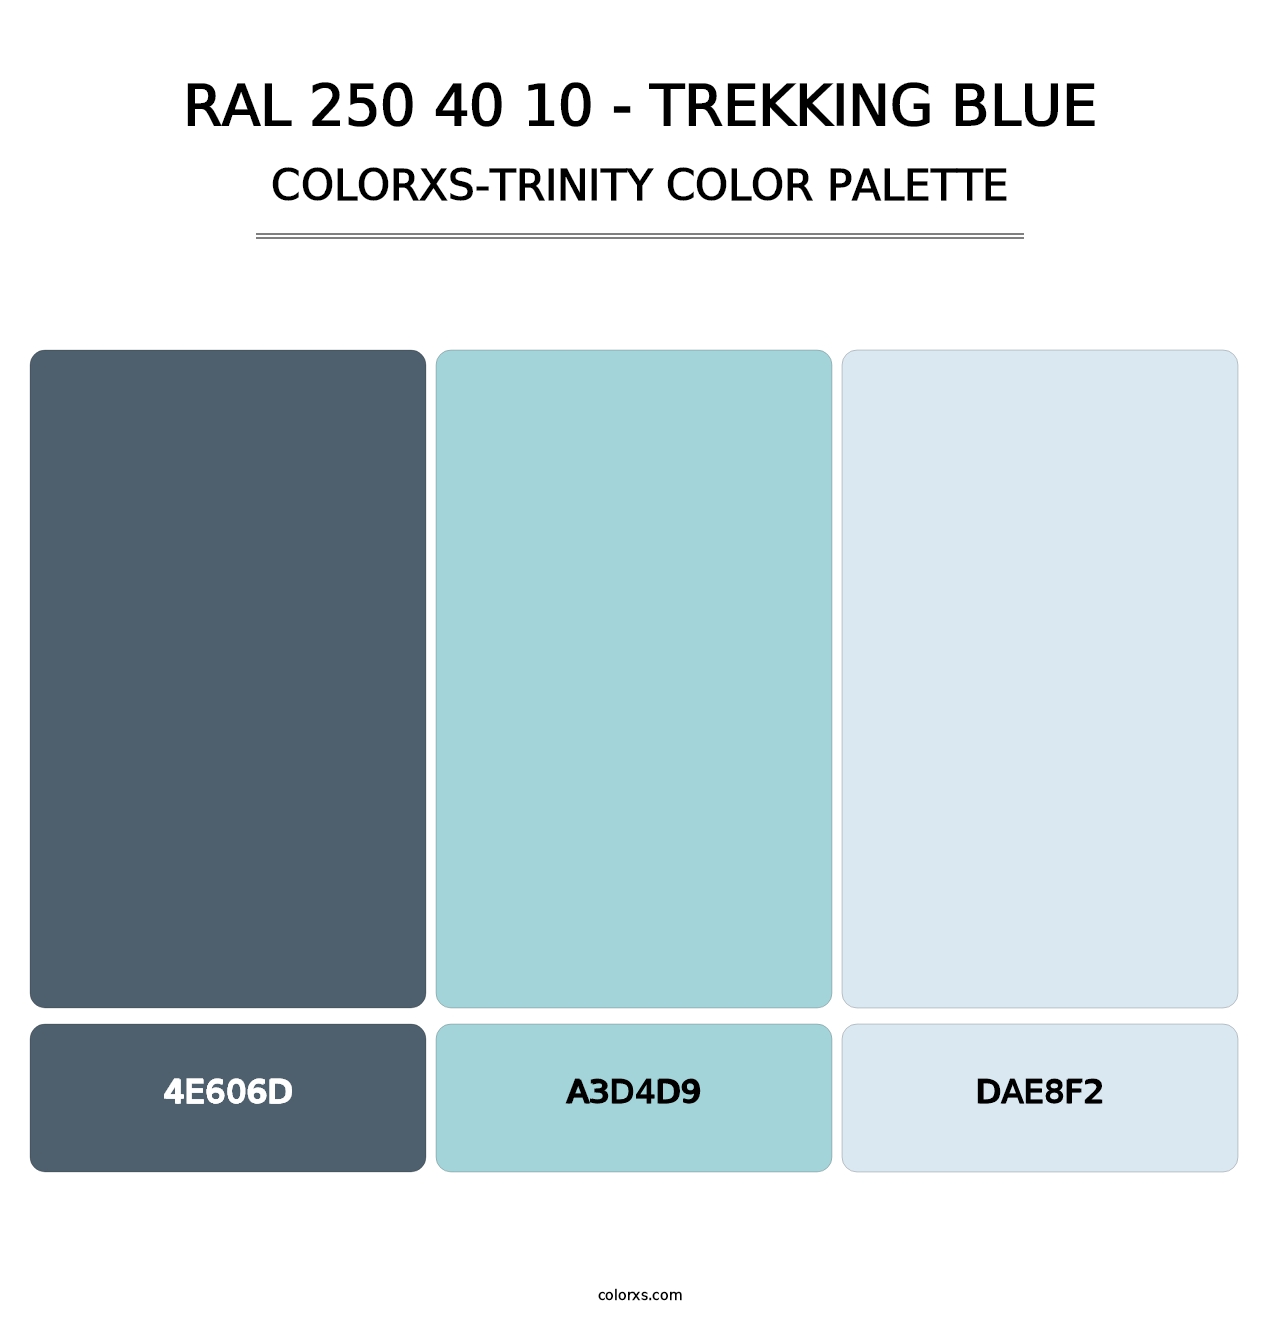 RAL 250 40 10 - Trekking Blue - Colorxs Trinity Palette